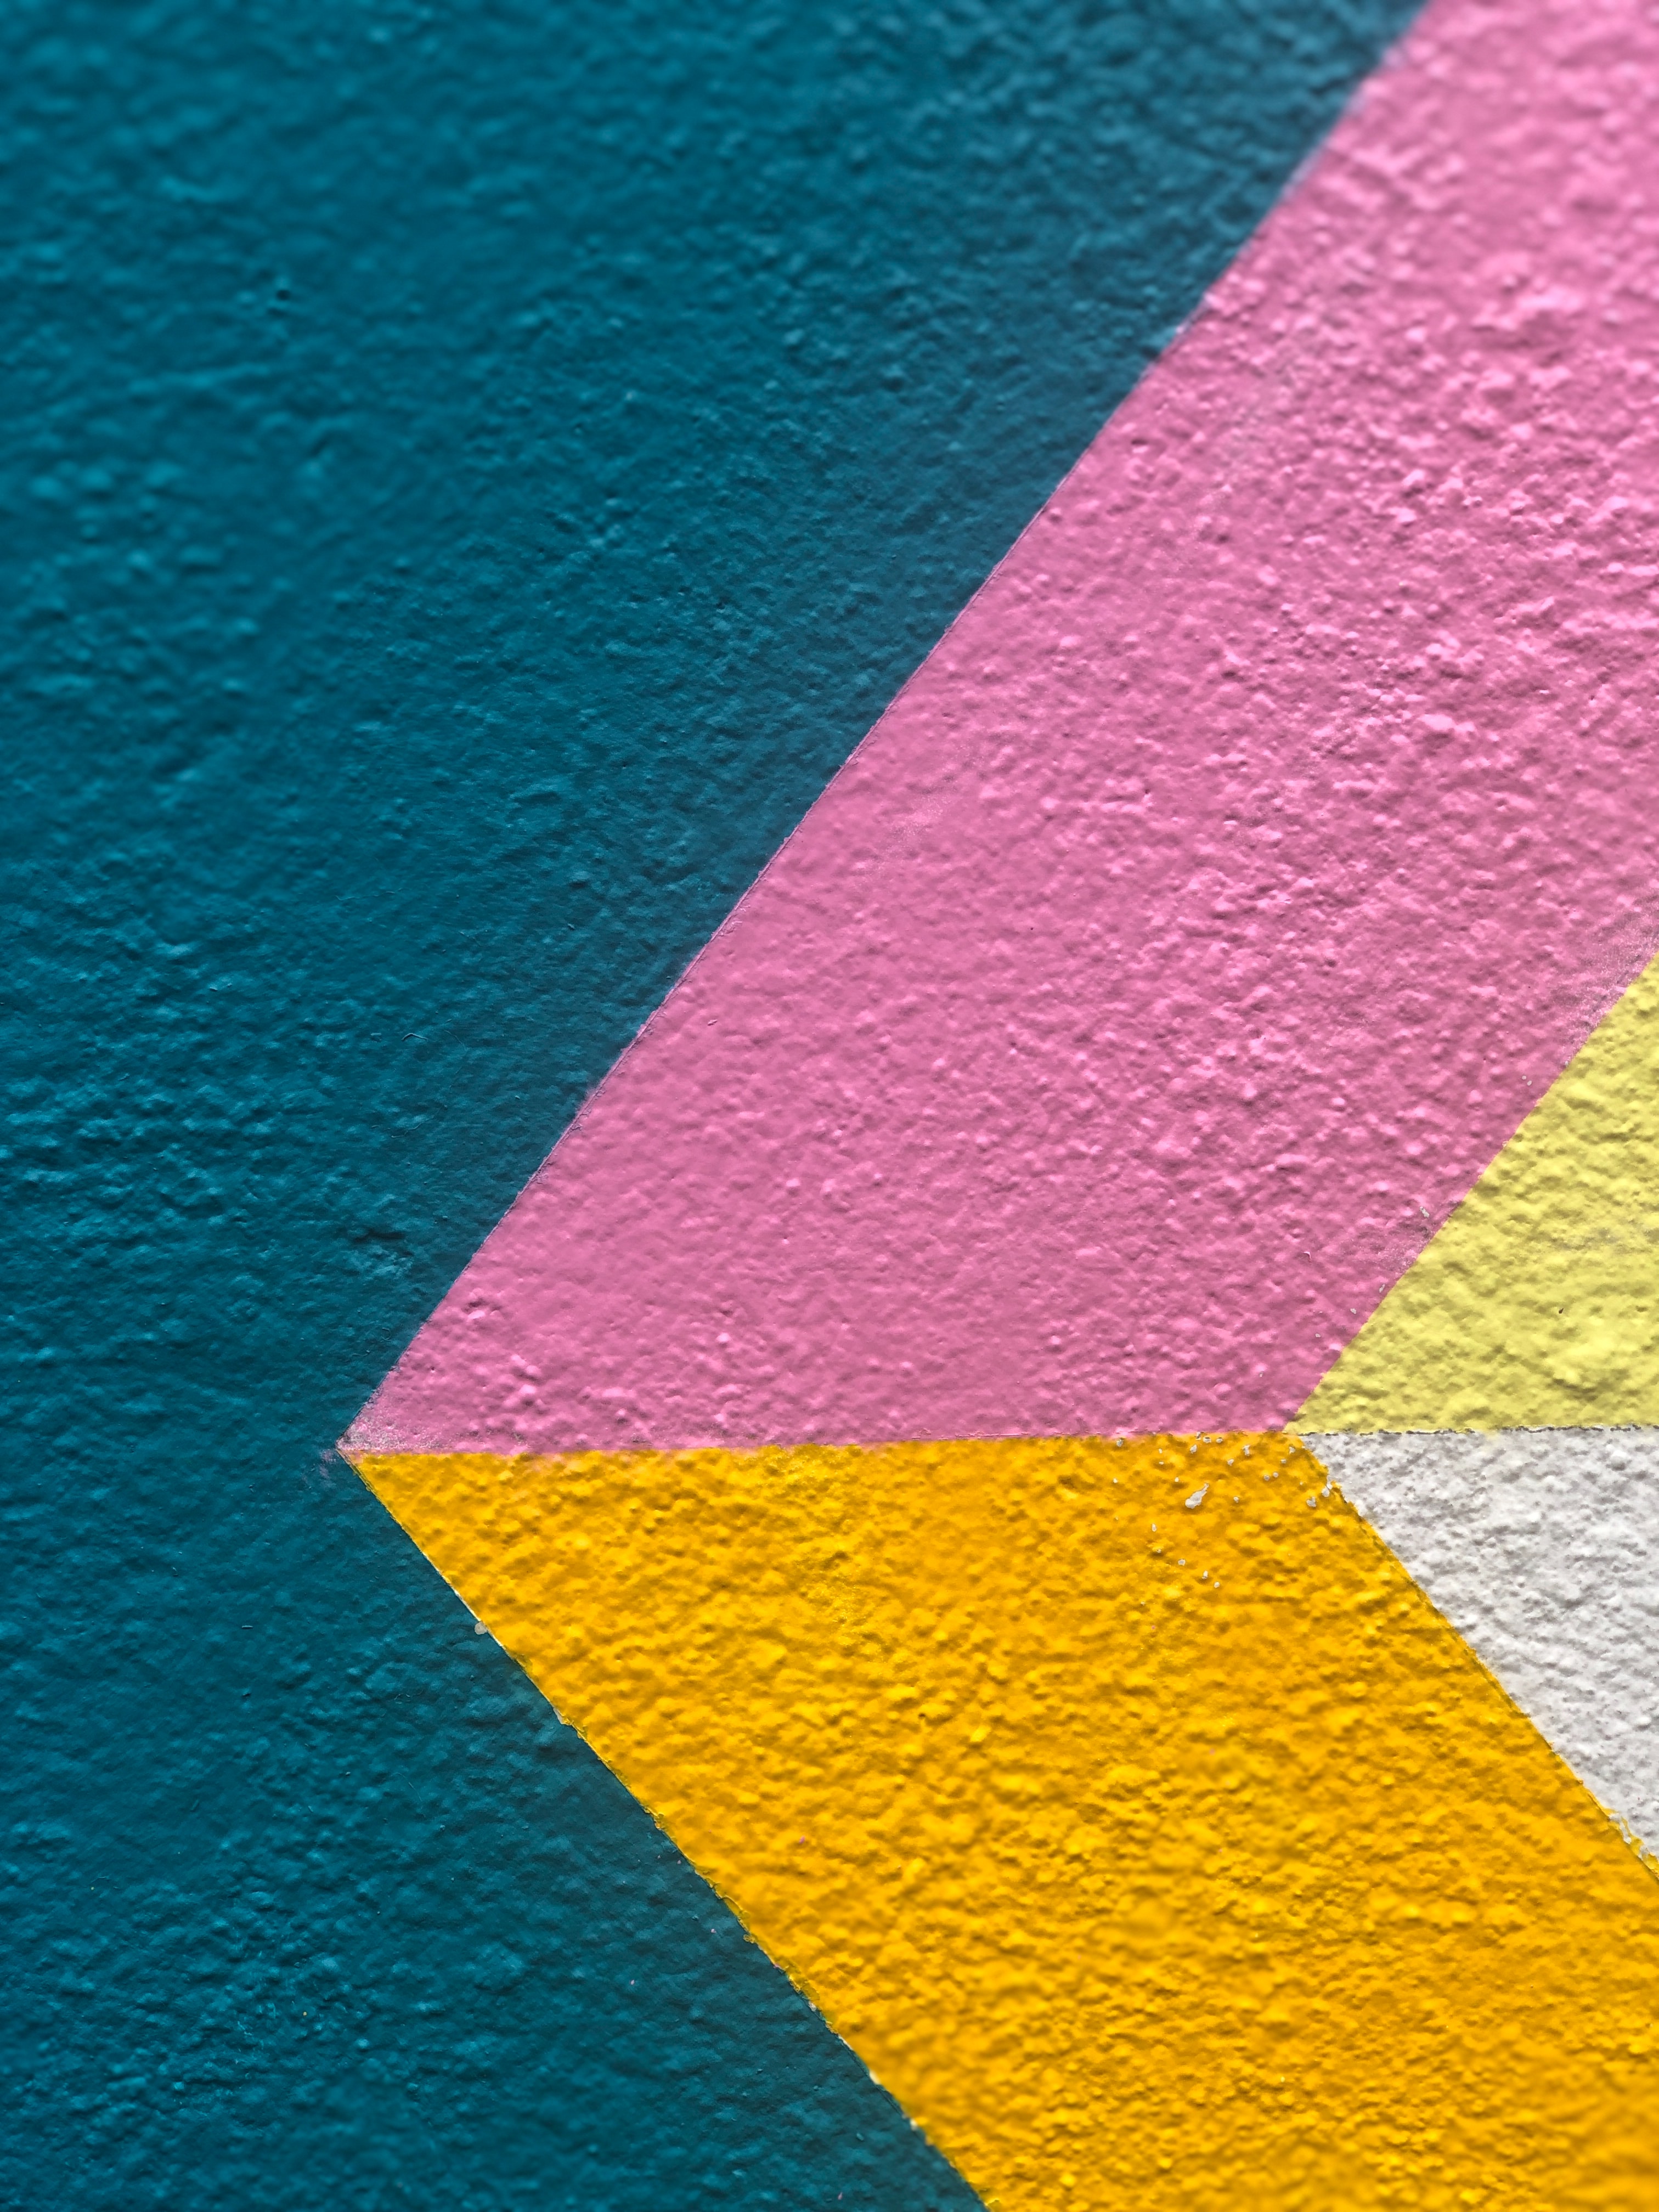 multicolored, motley, pattern, texture, textures, paint, wall for android